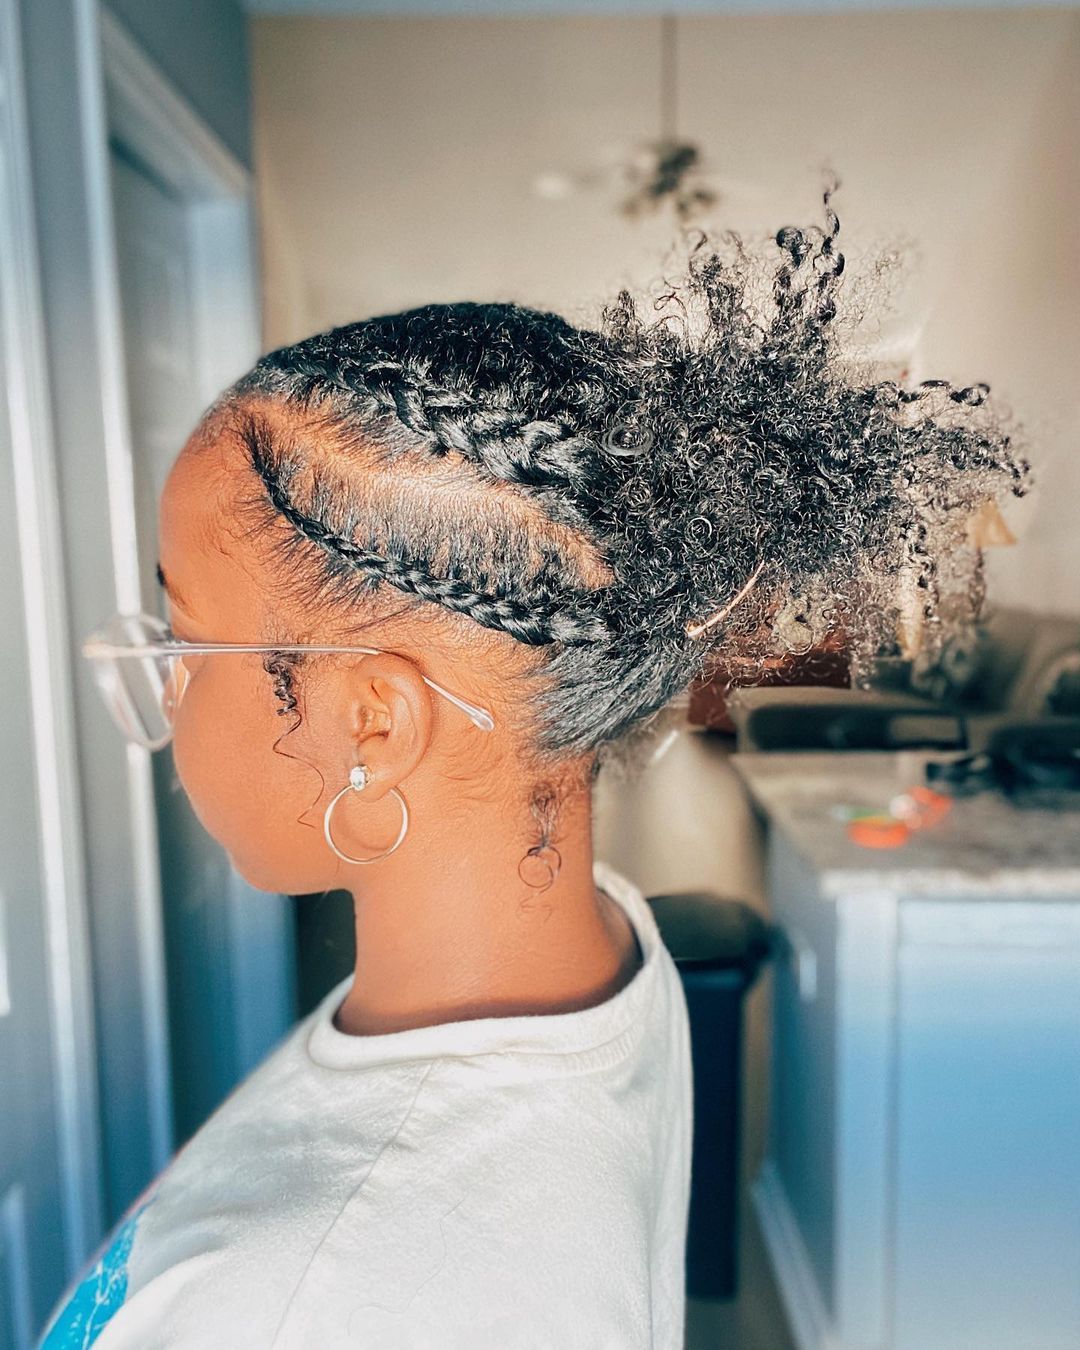 Updo Hairstyle for Black women 22 Black hair updo styles pictures | Black updo hairstyles with curls | black woman braids Updo Hairstyles for Black Women